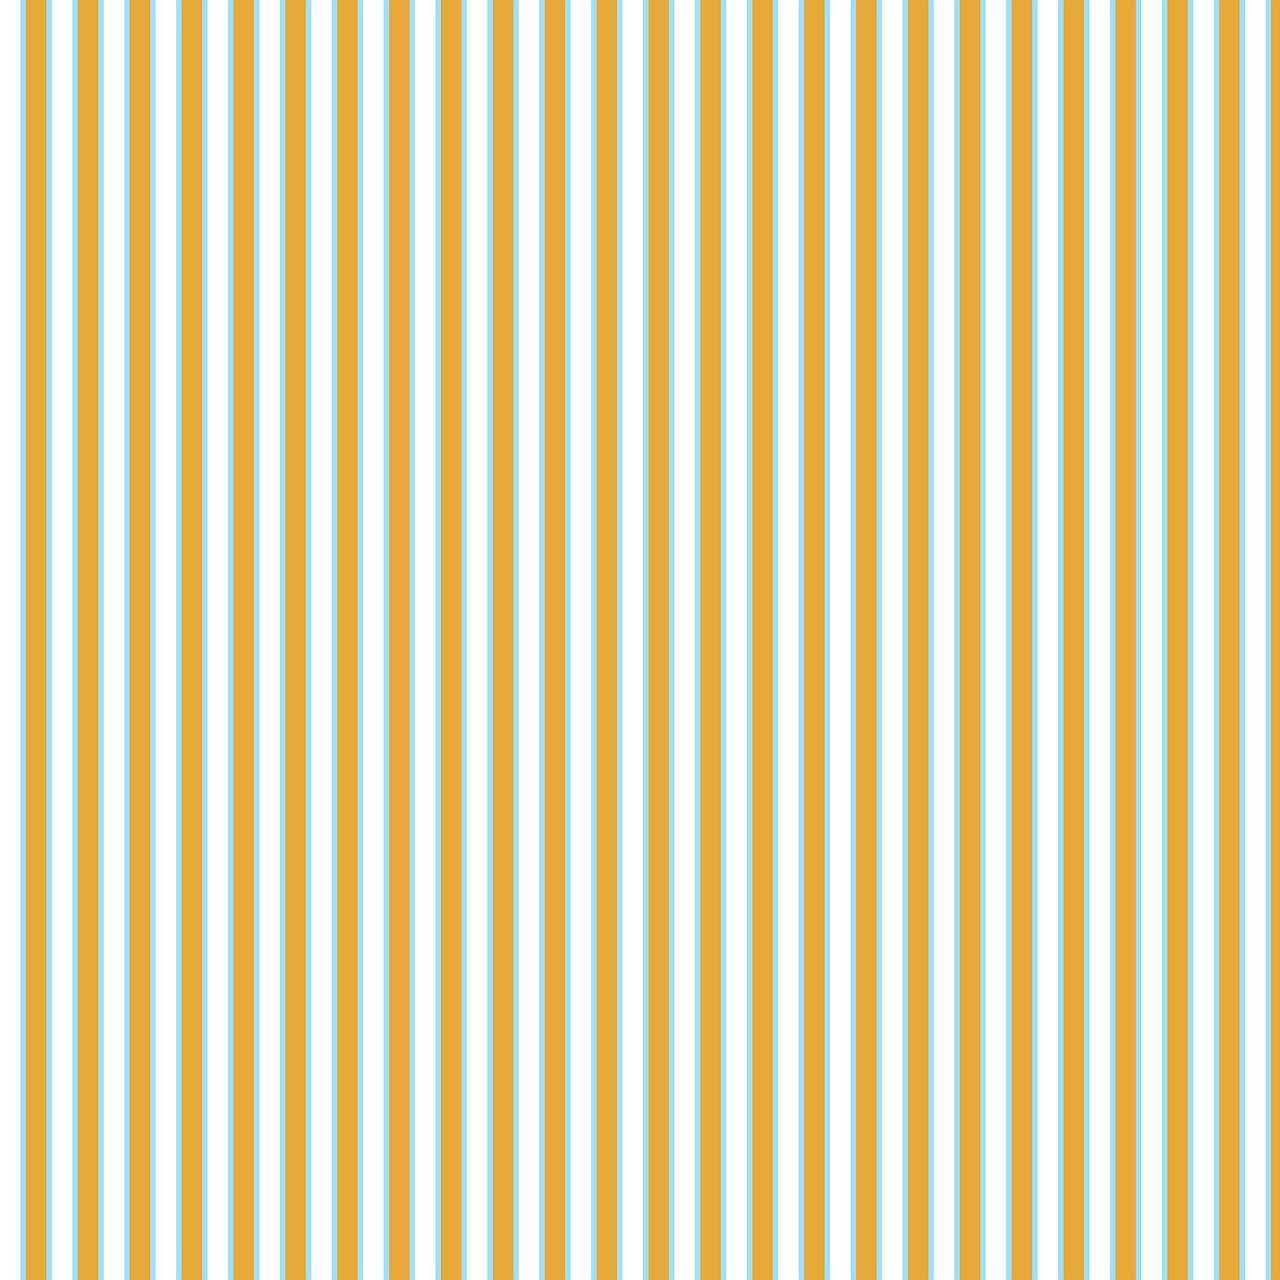 background striped png free photo